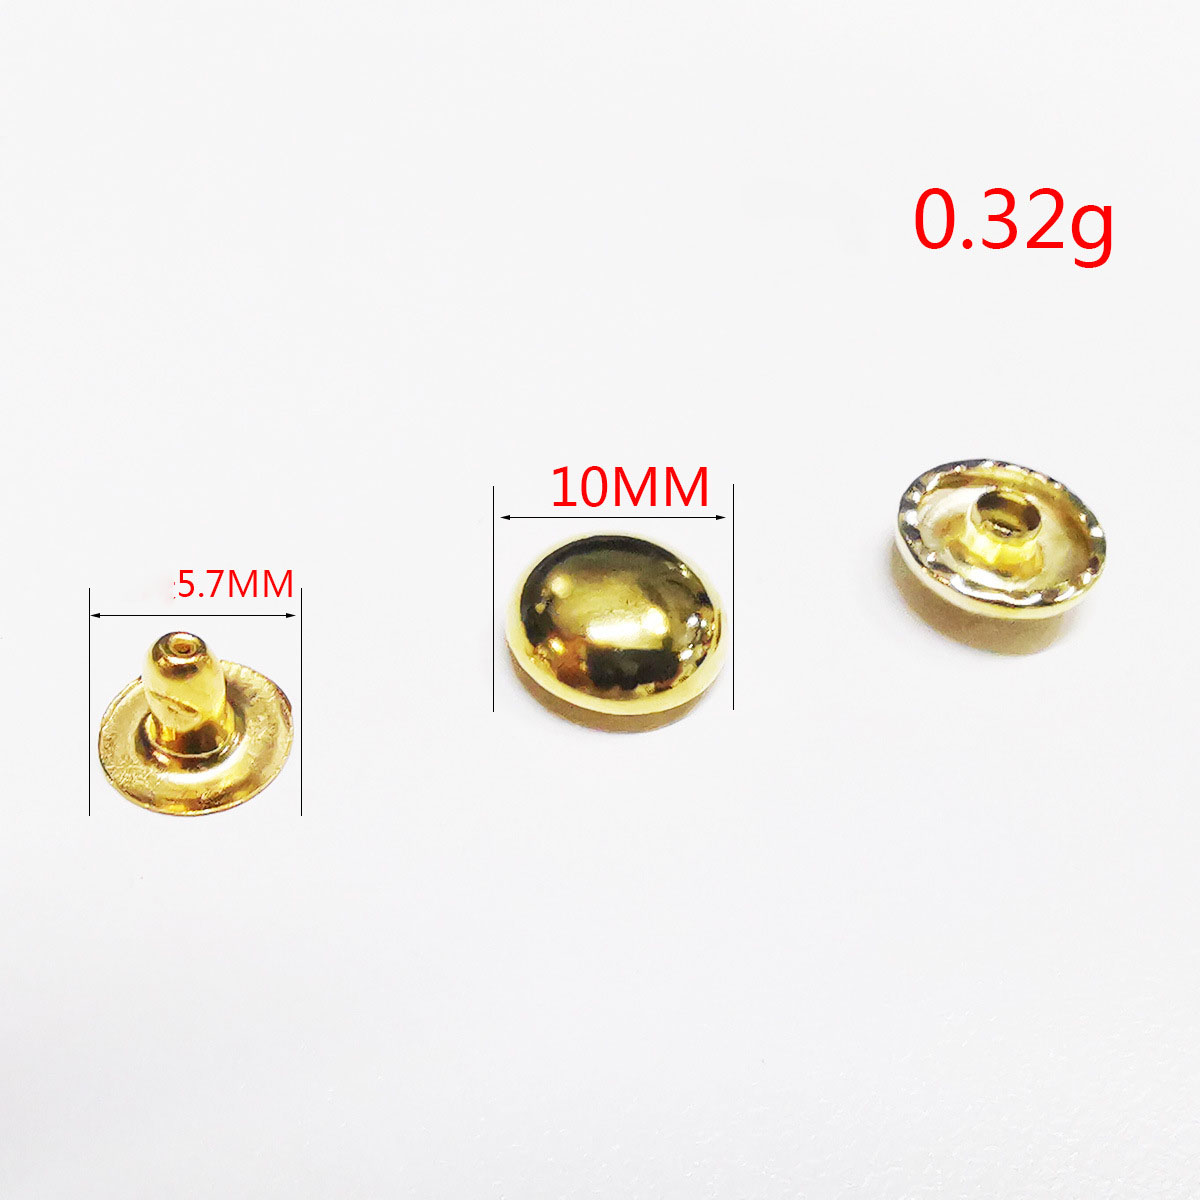 10mm gold